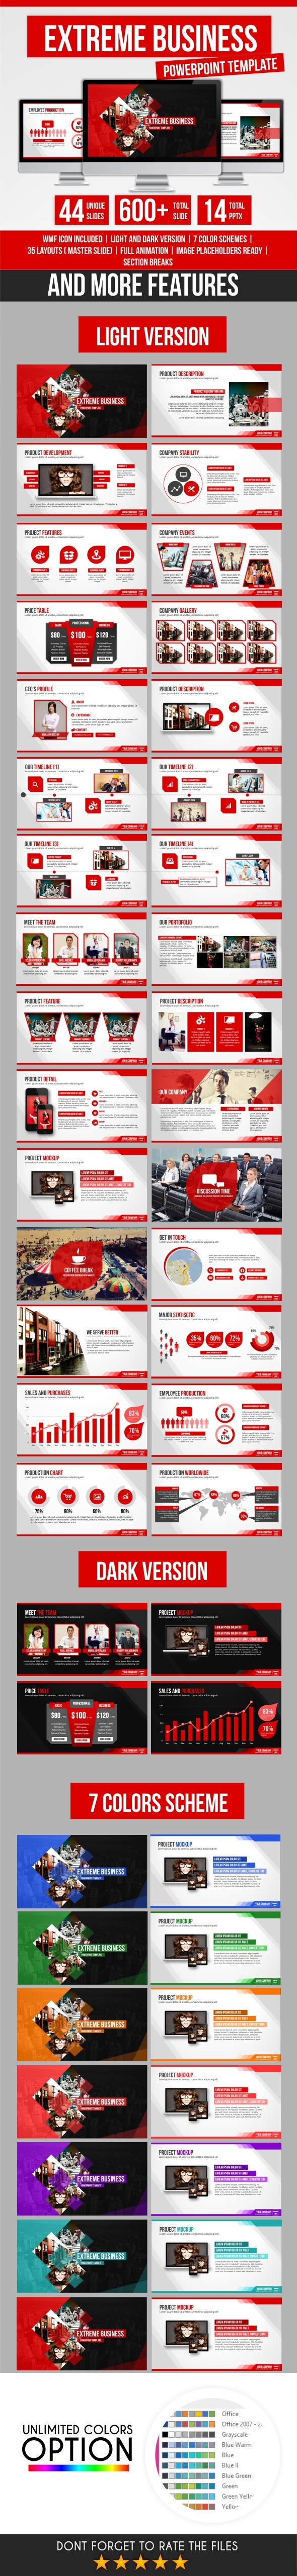 Extreme Bussiness PowerPoint Template